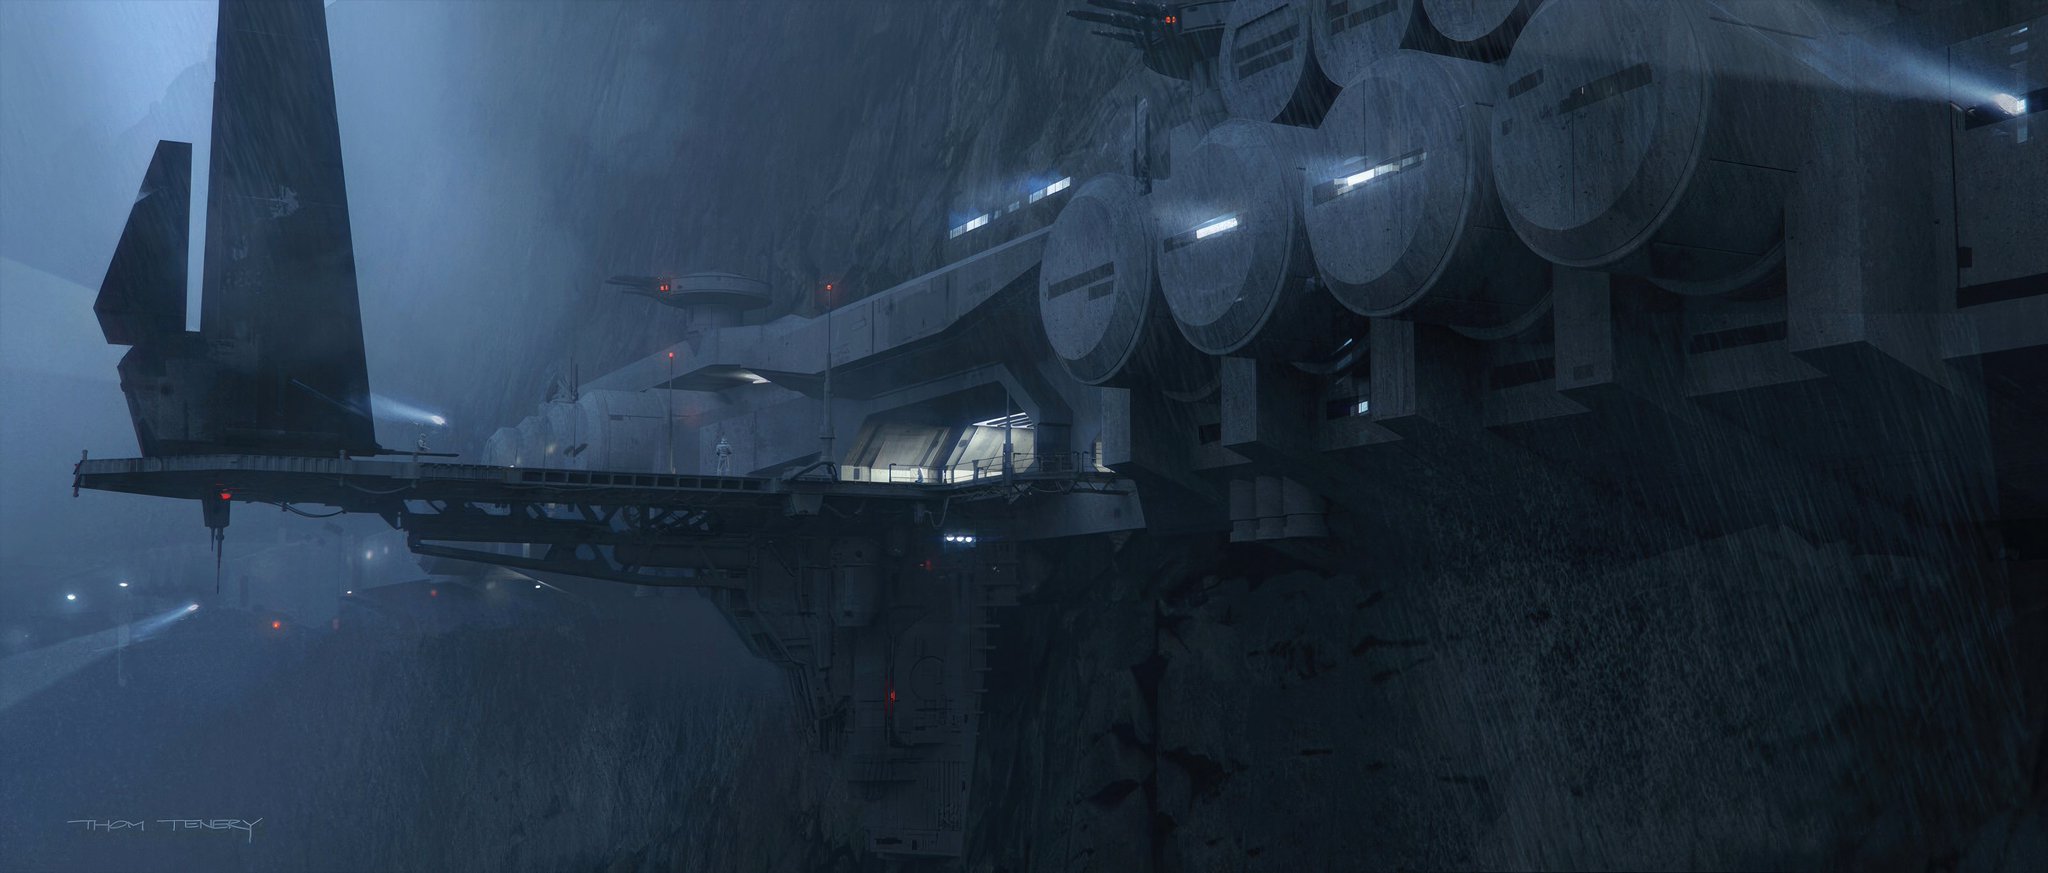 Designing Film On Twitter Concept Art Of The Imperial Facility On Eadu By Thom Tenery For